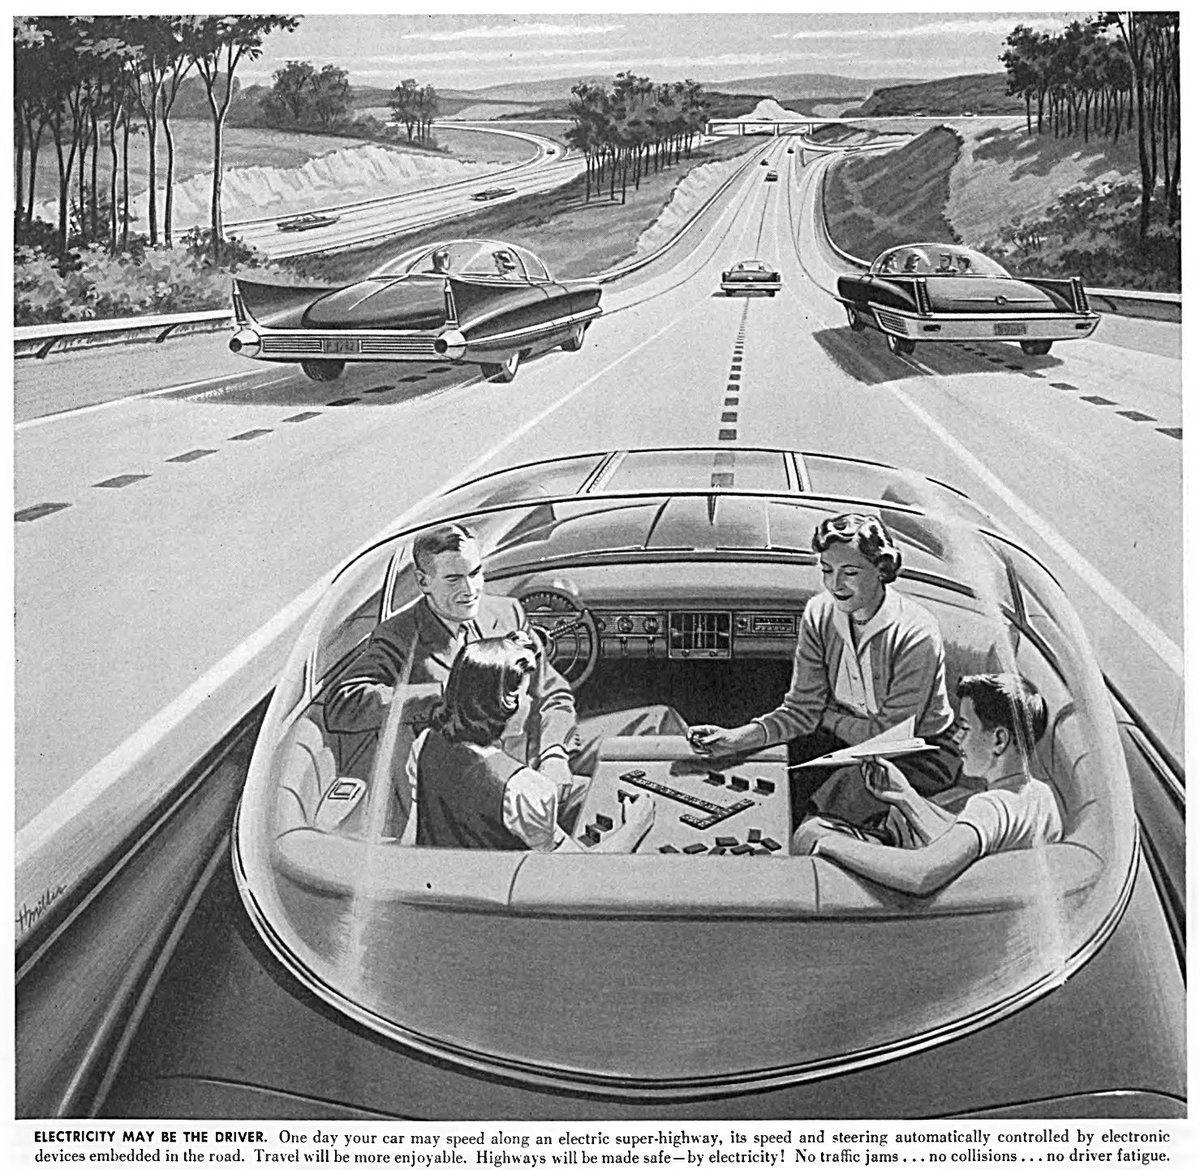 Envisioning a future with driverless cars on an electric super-highway in 1956: